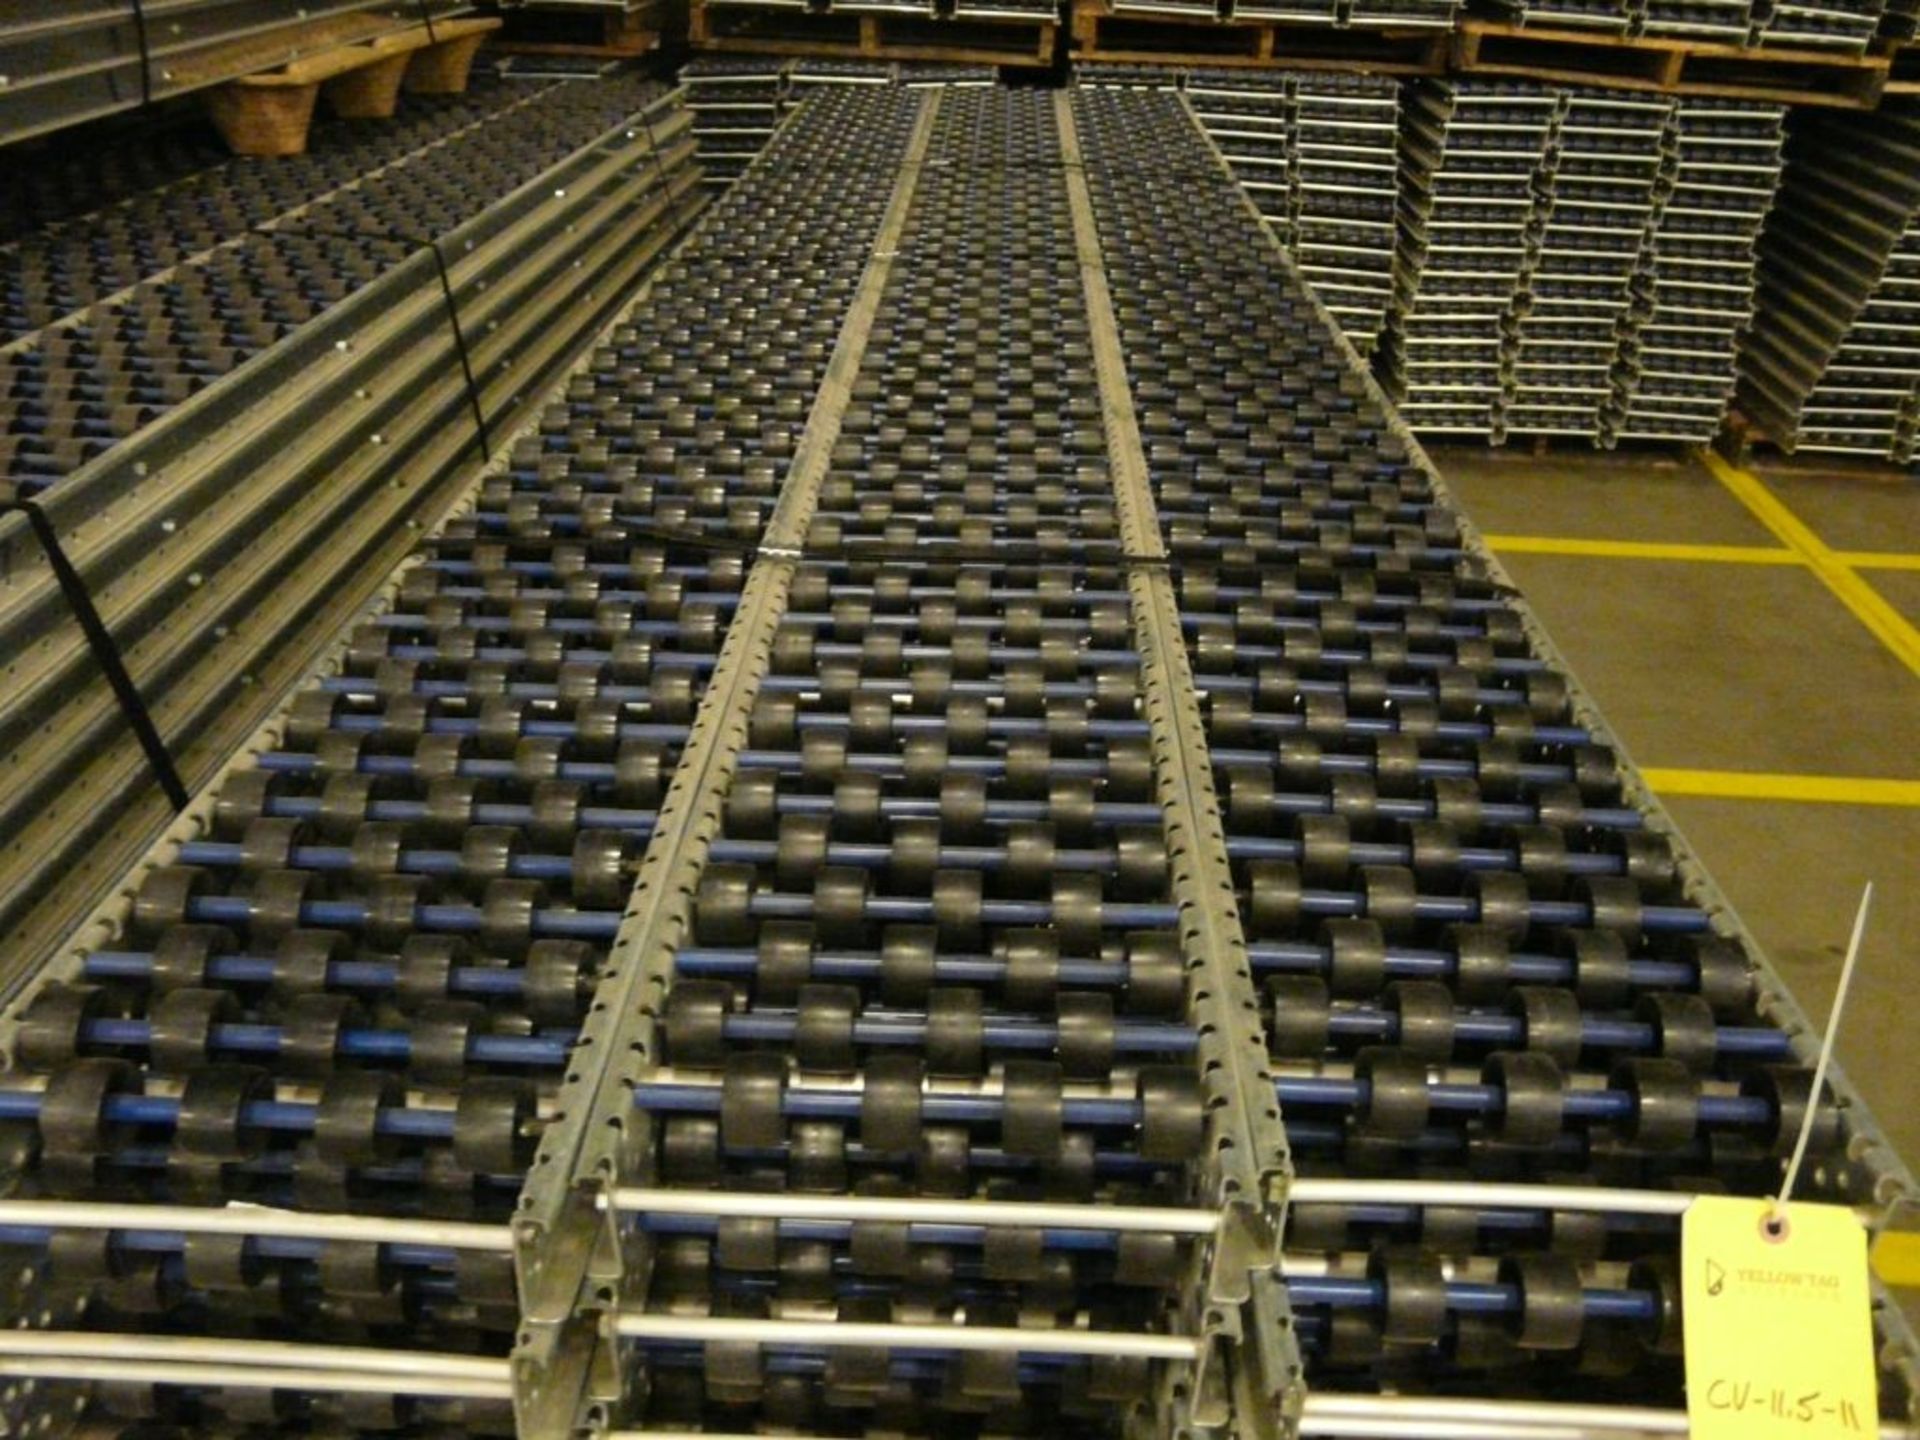 Lot of (90) SpanTrack Wheelbed Carton Flow Conveyors - 11.5'L x 11"W; Tag: 223627 - $30 Lot - Image 3 of 4